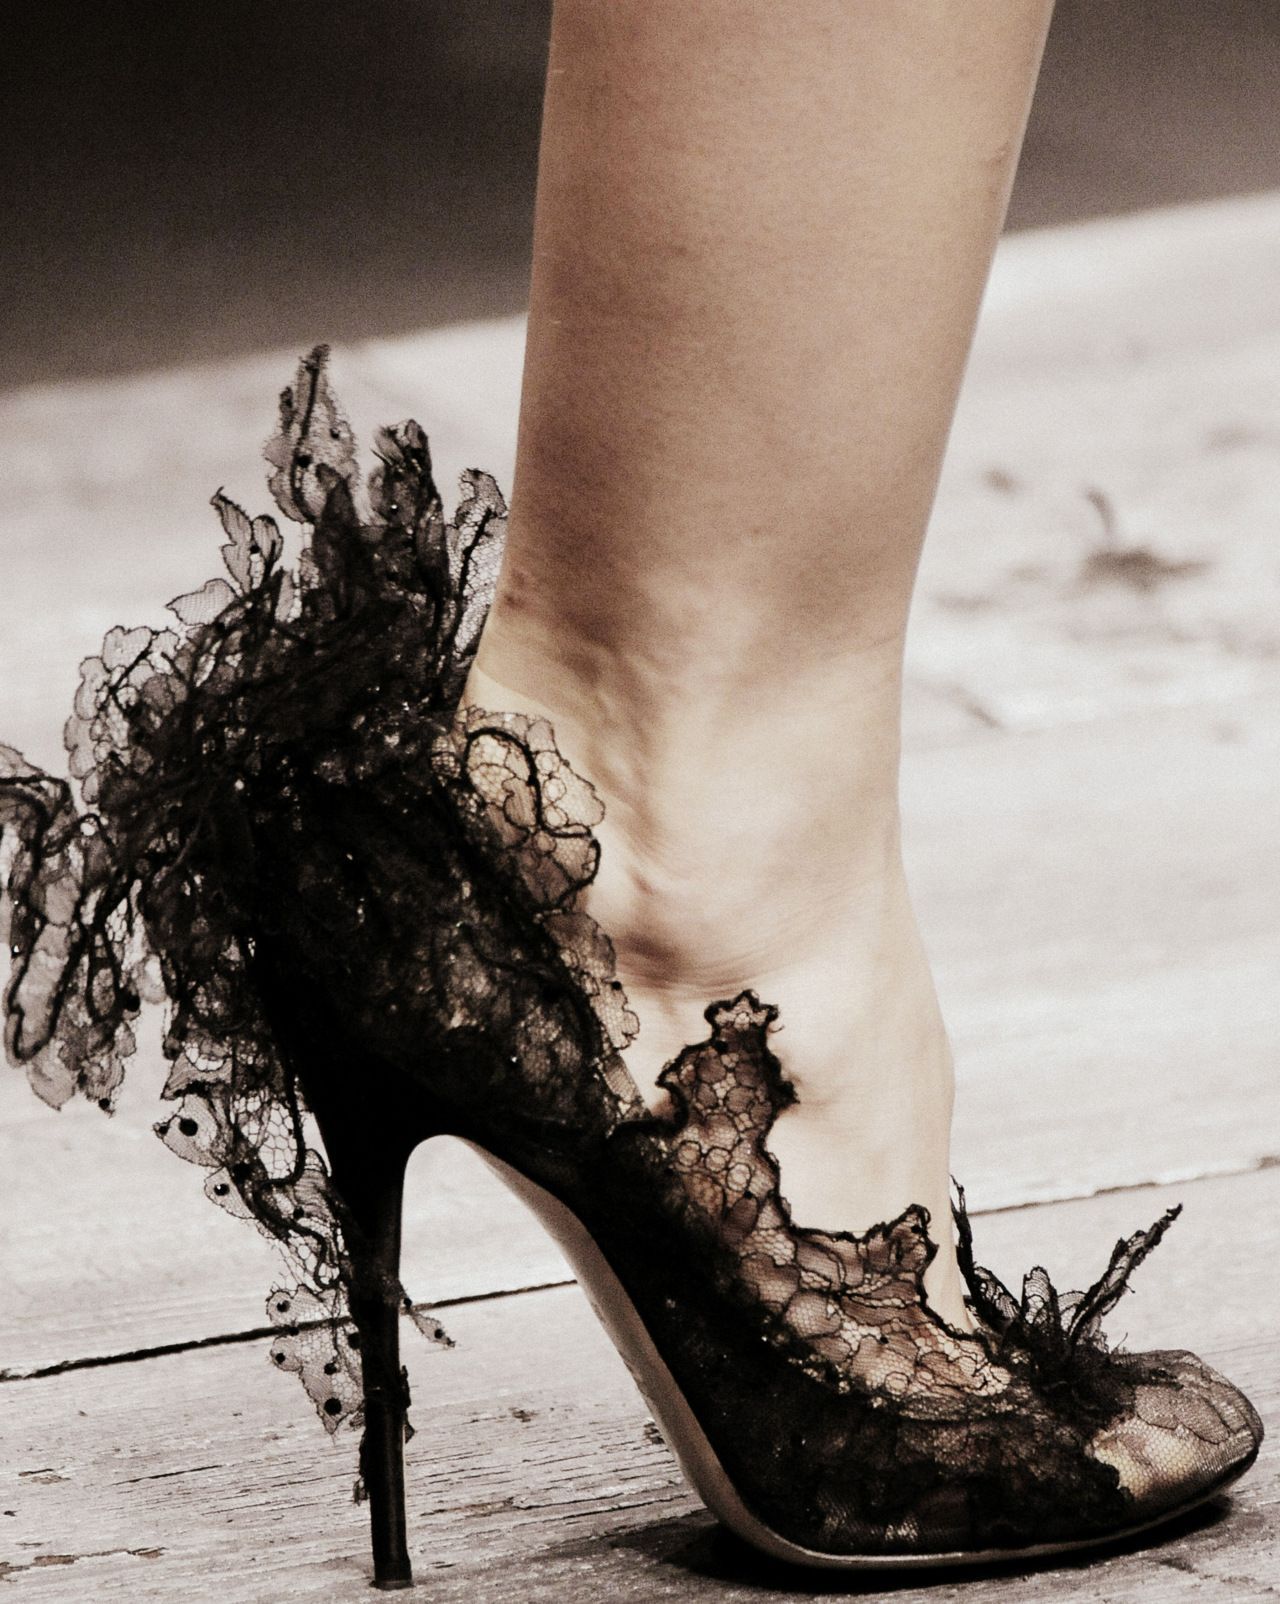 Valentino Spring/Summer 2010 shoes, collaboration with Philip Treacy